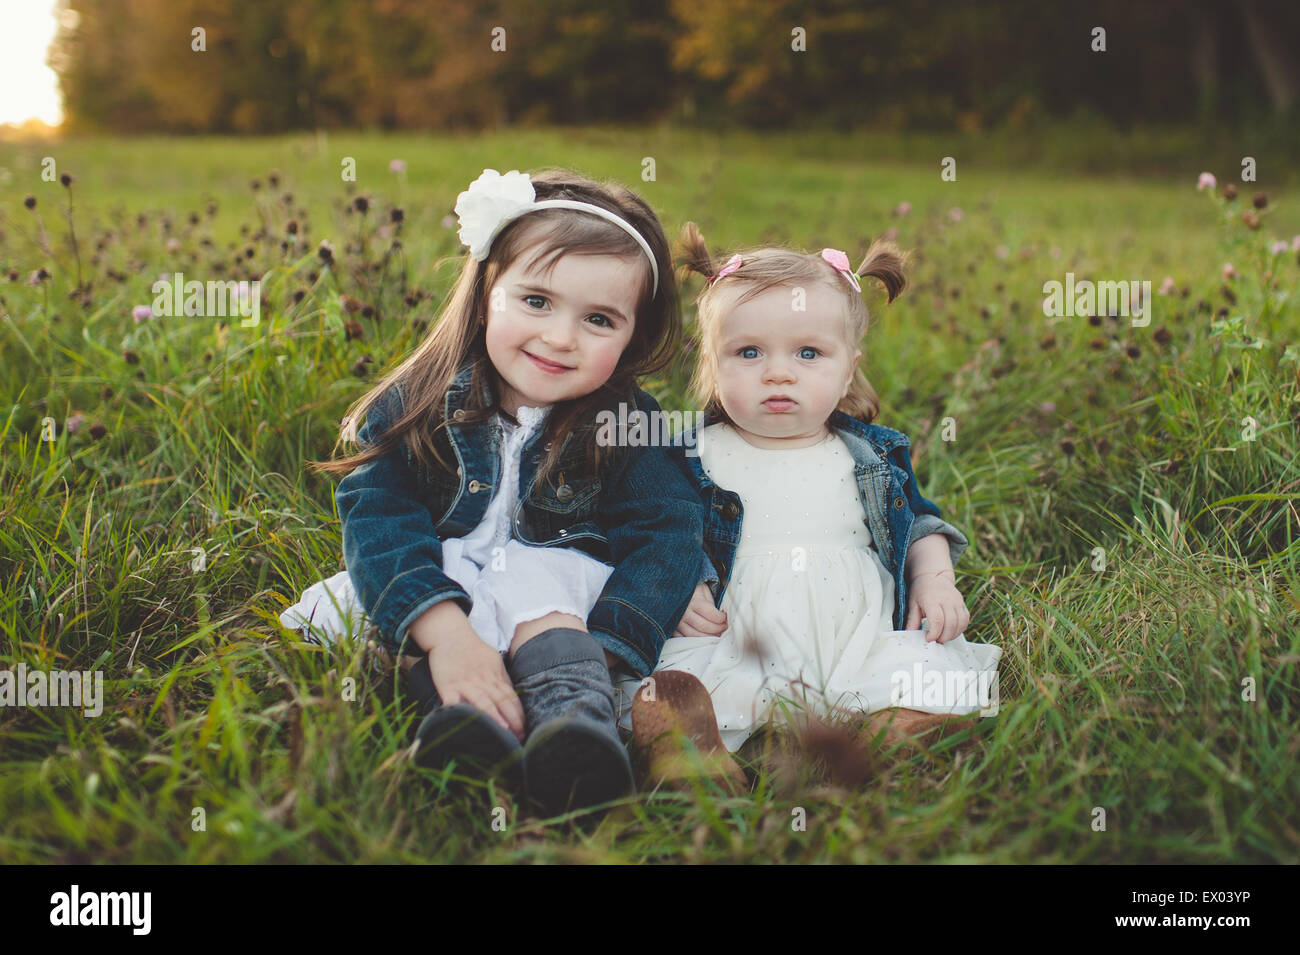 Portrait of young girl and baby sister in field Stock Photo